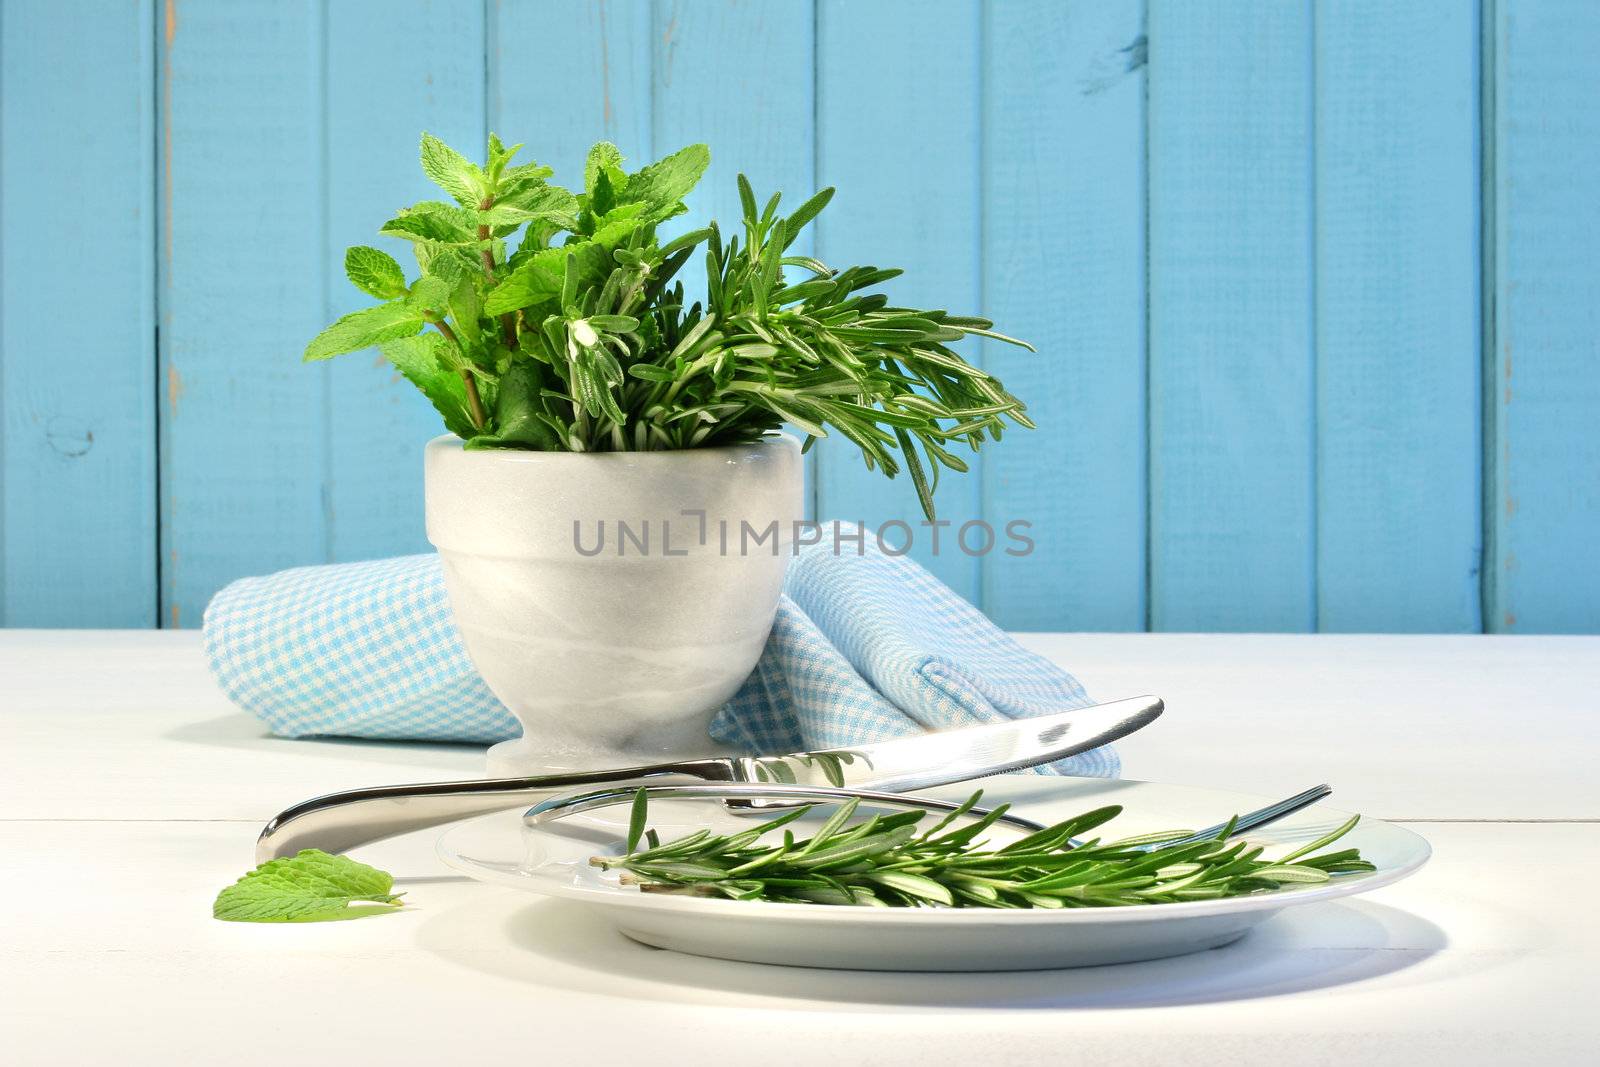 Fresh herbs on the table by Sandralise